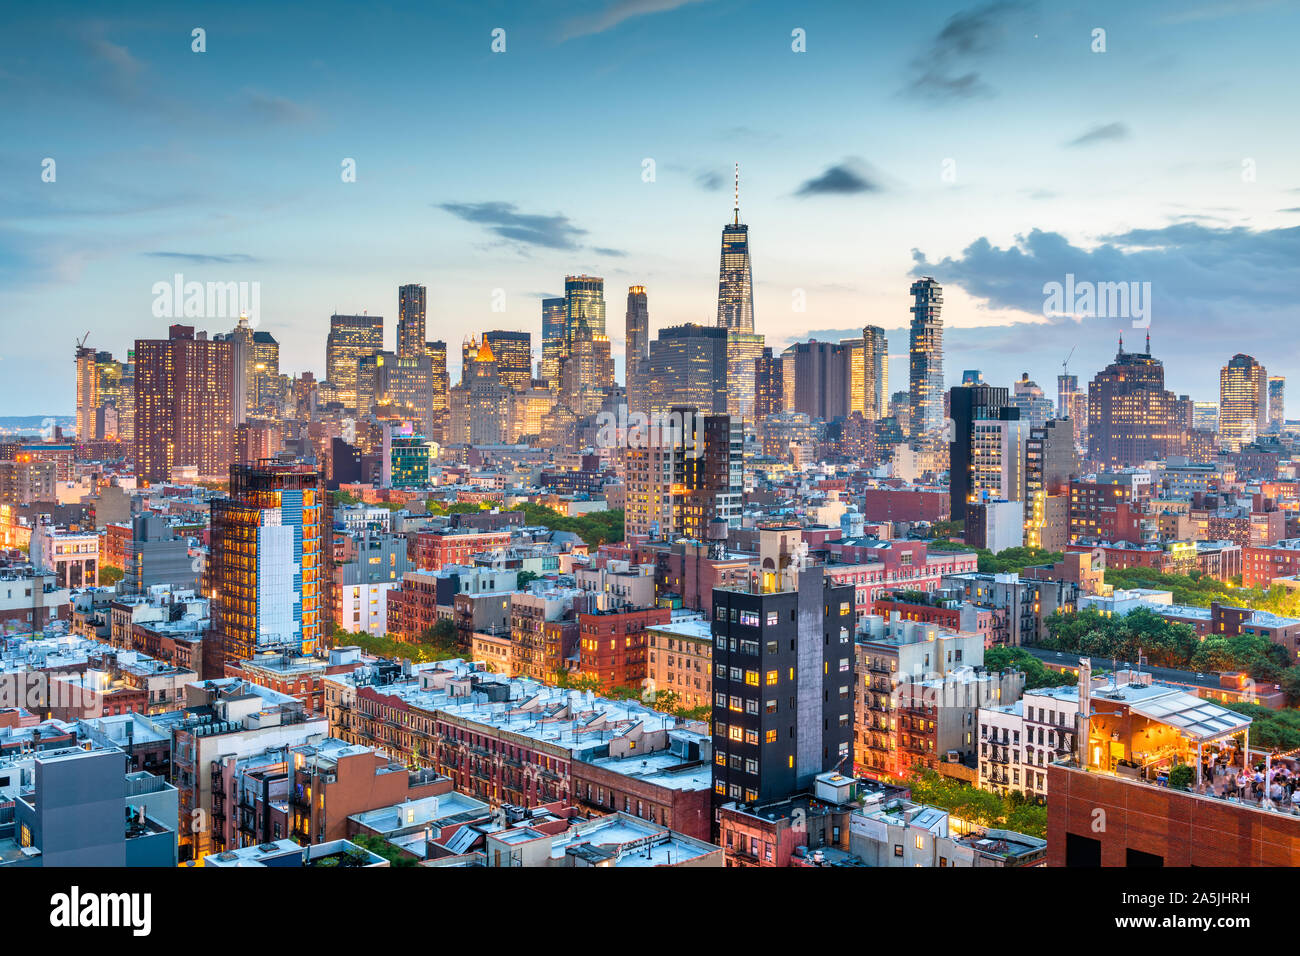 New York, New York, USA Financial district skyline from the Lower East Side at dusk. Stock Photo